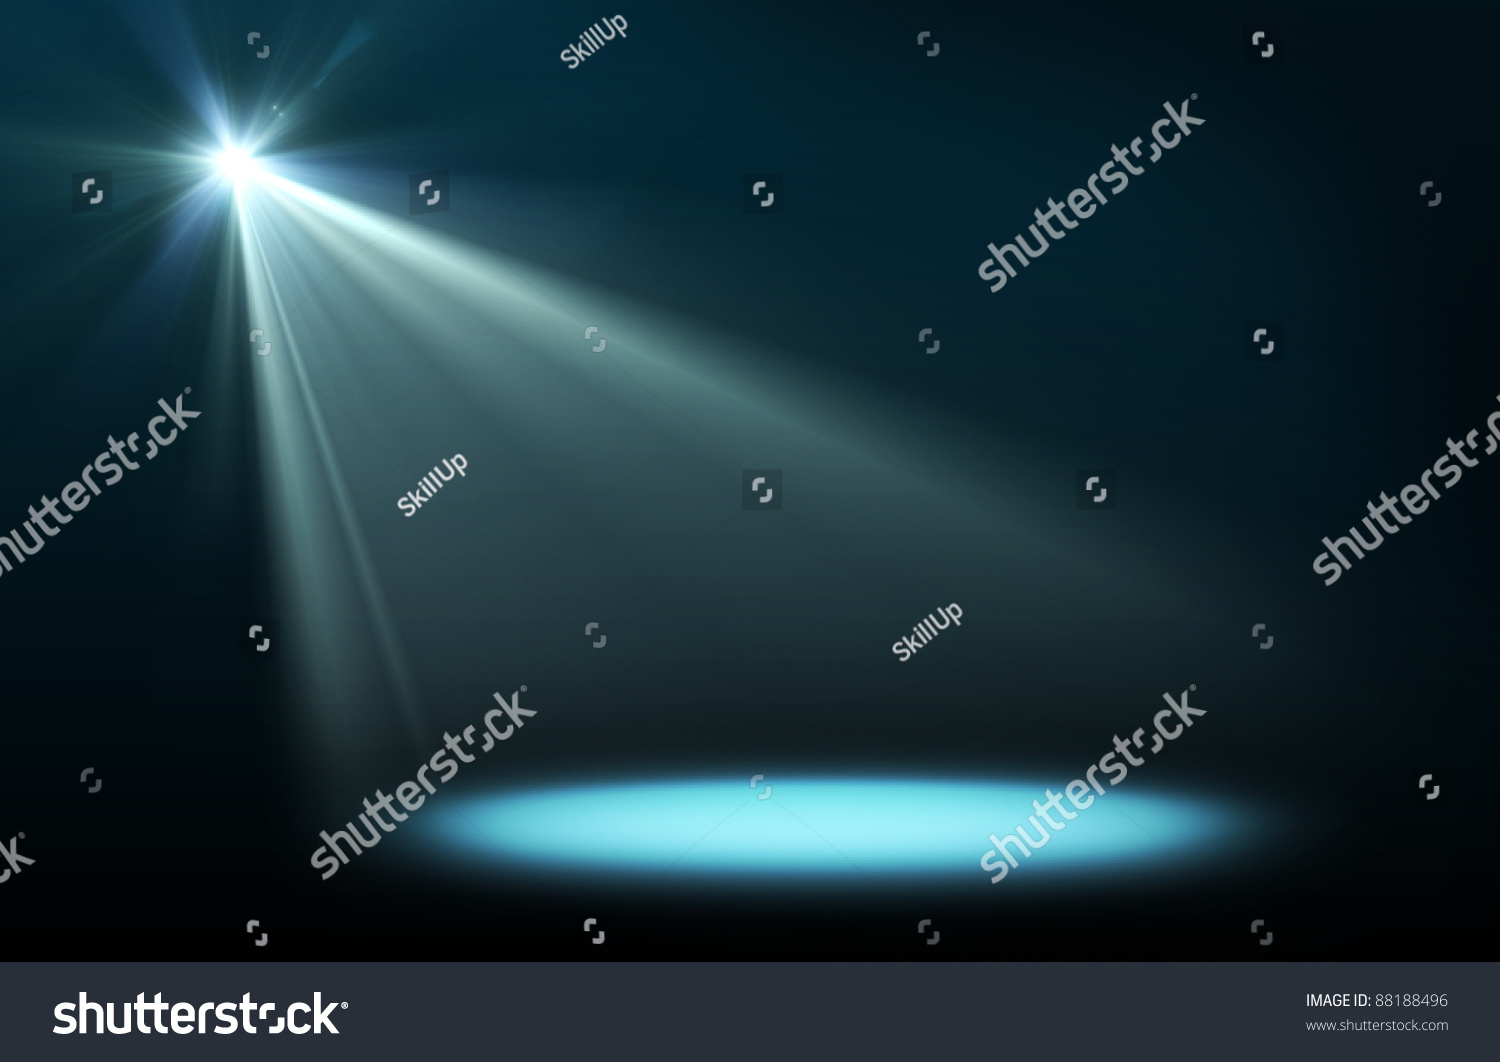 Abstract image of concert lighting #88188496